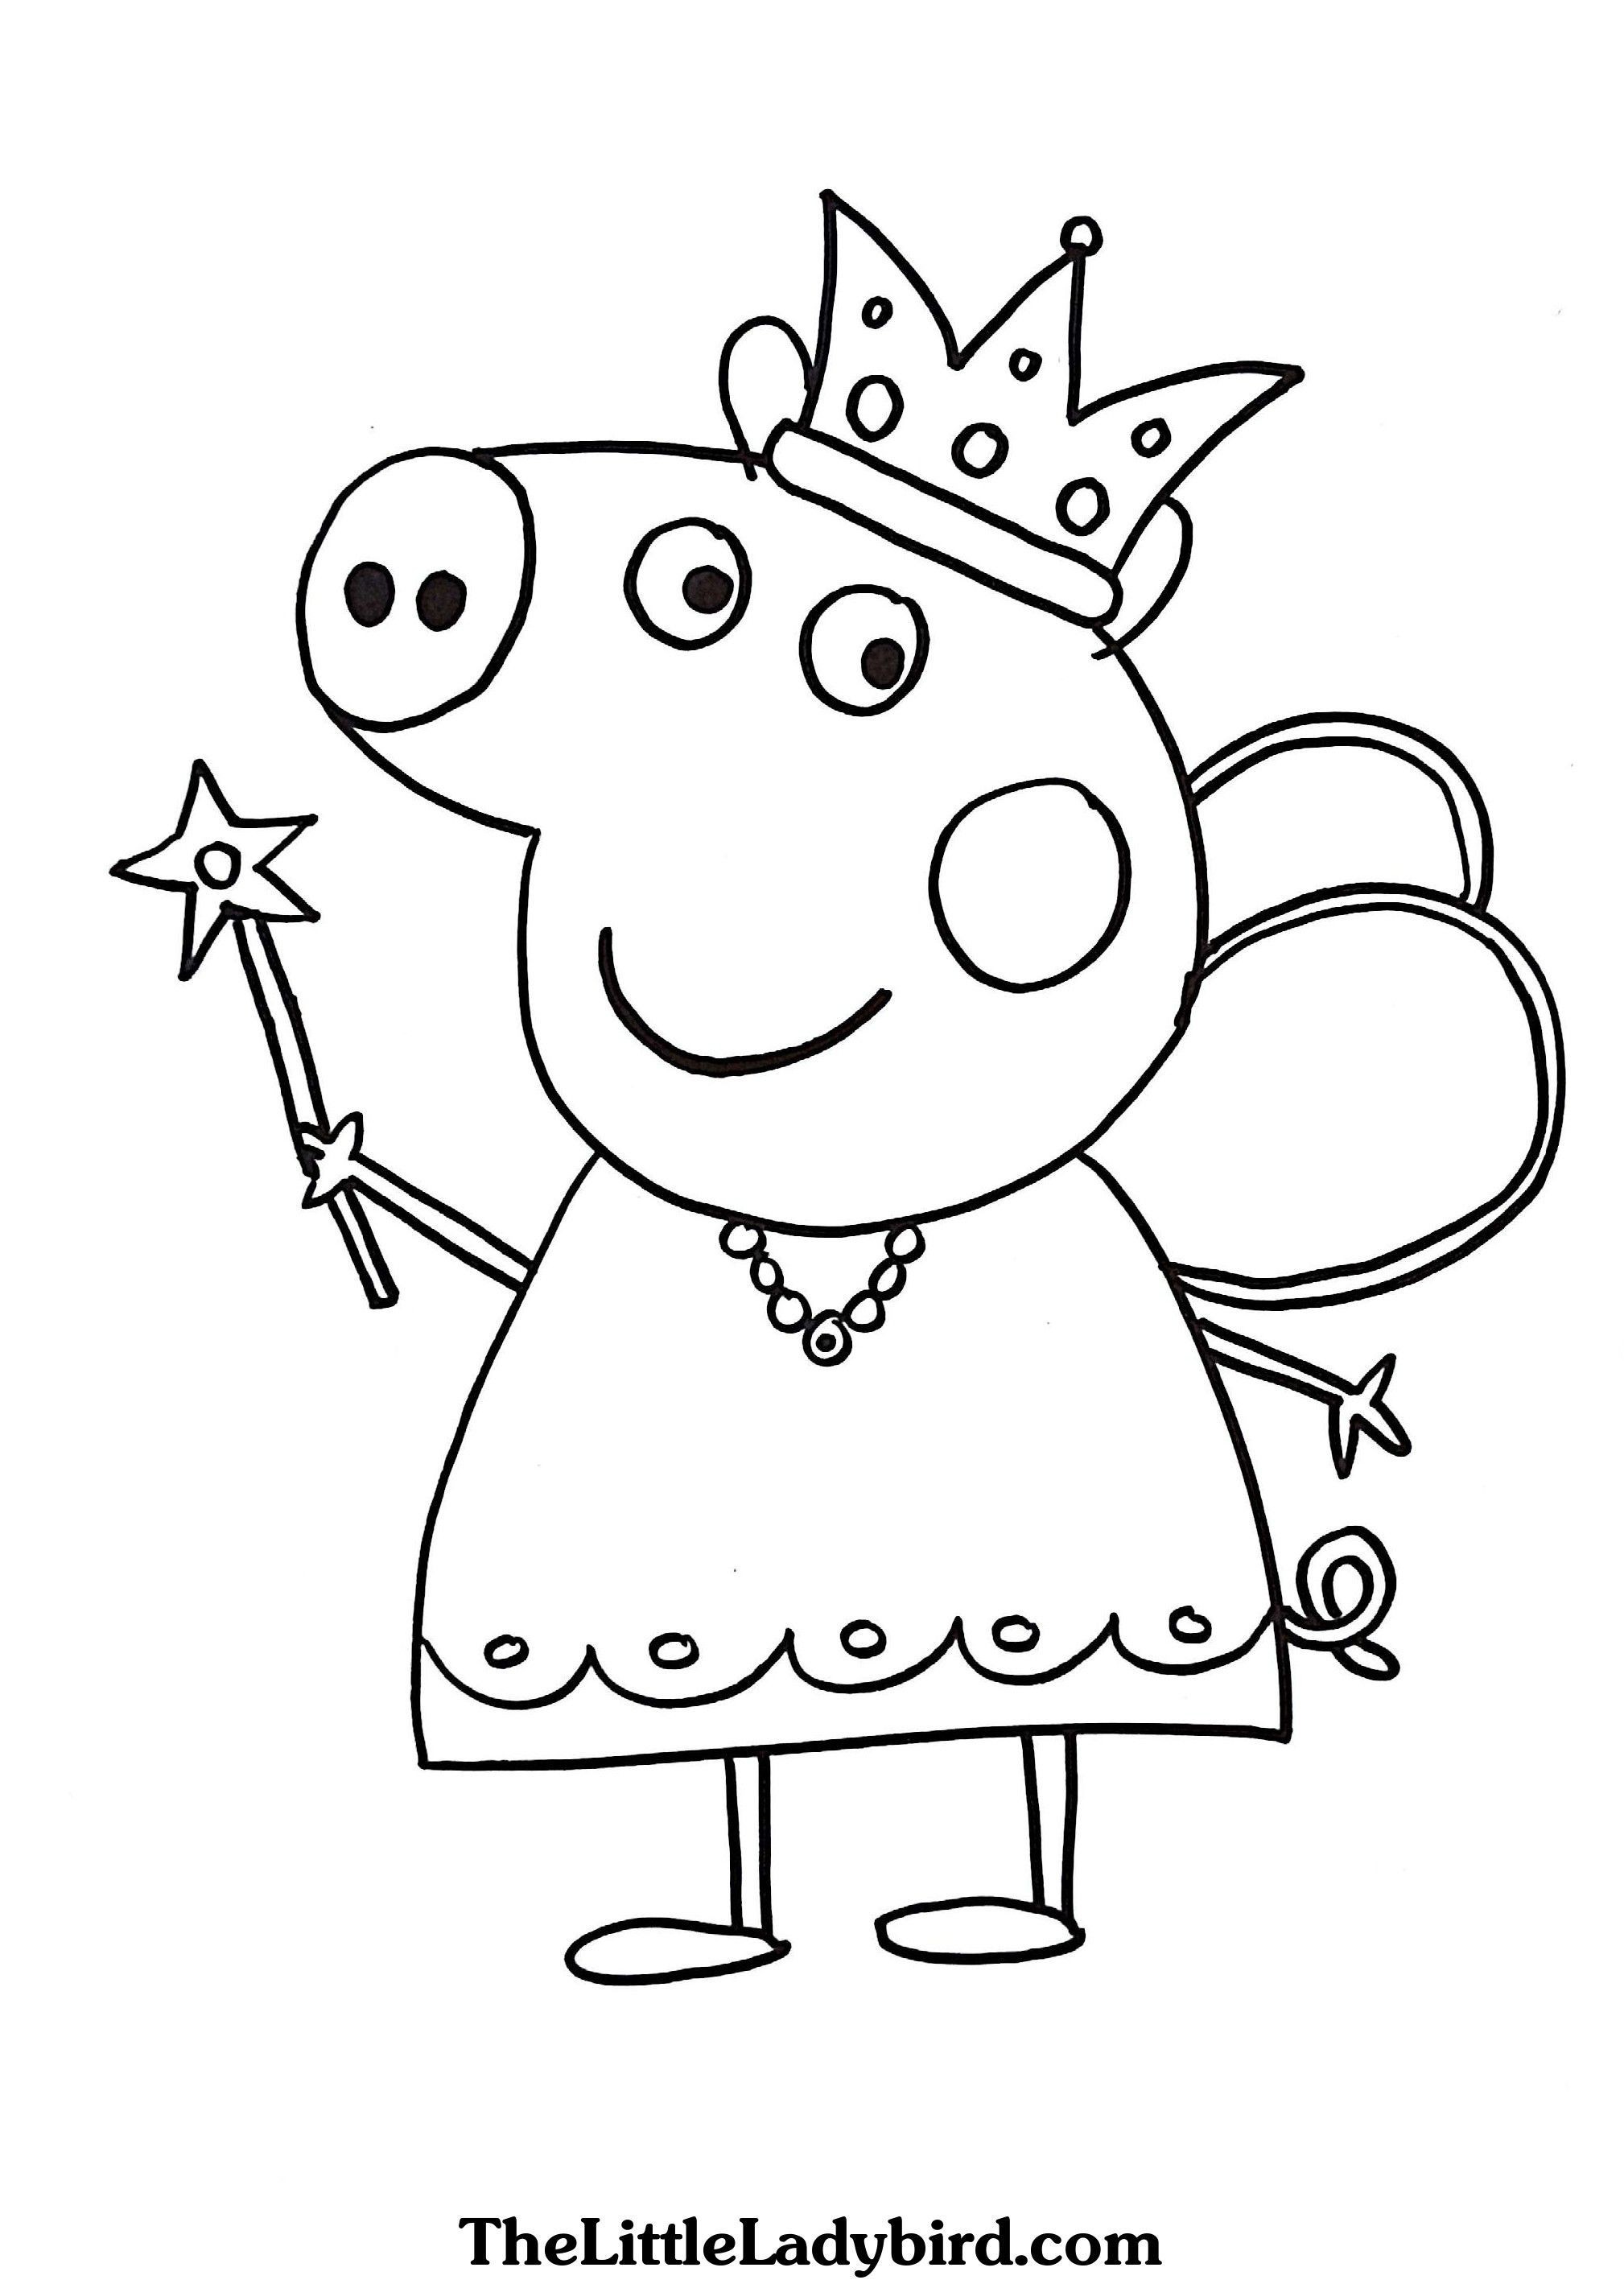 Peppa Pig Coloring Pages Momjunction - BubaKids.com